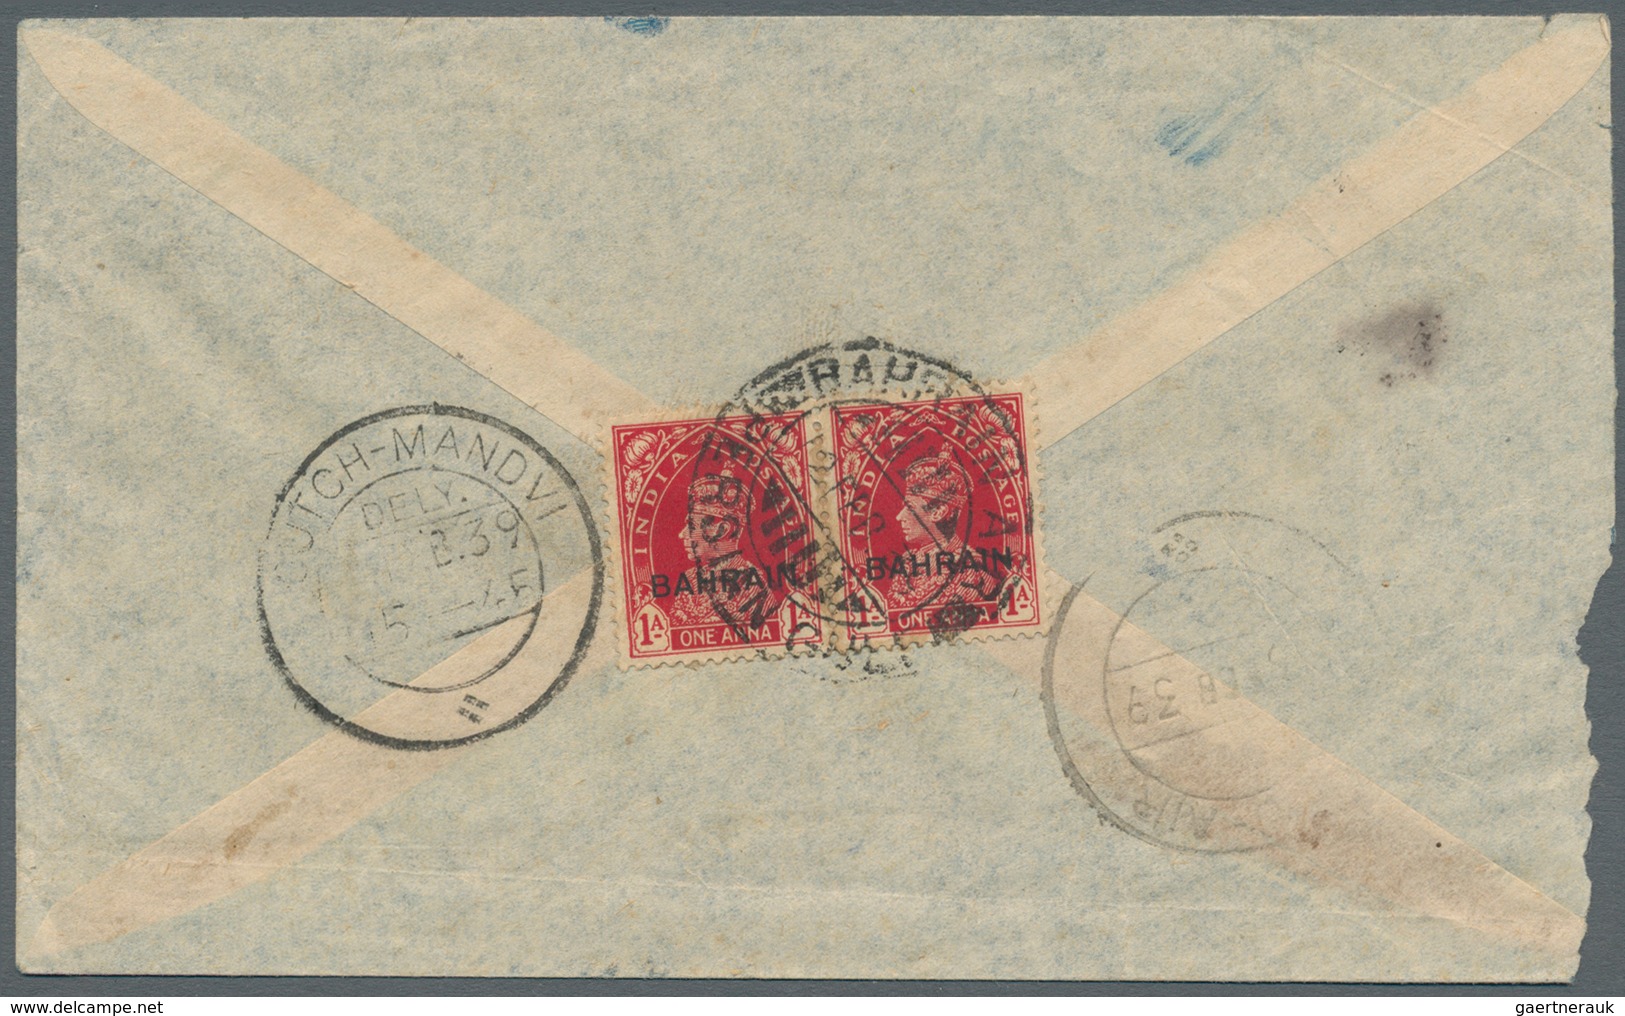 08065 Bahrain: 1932-39: Four covers from Bahrain to Cutch-Mandvi, India, with 1932 cover franked India (un